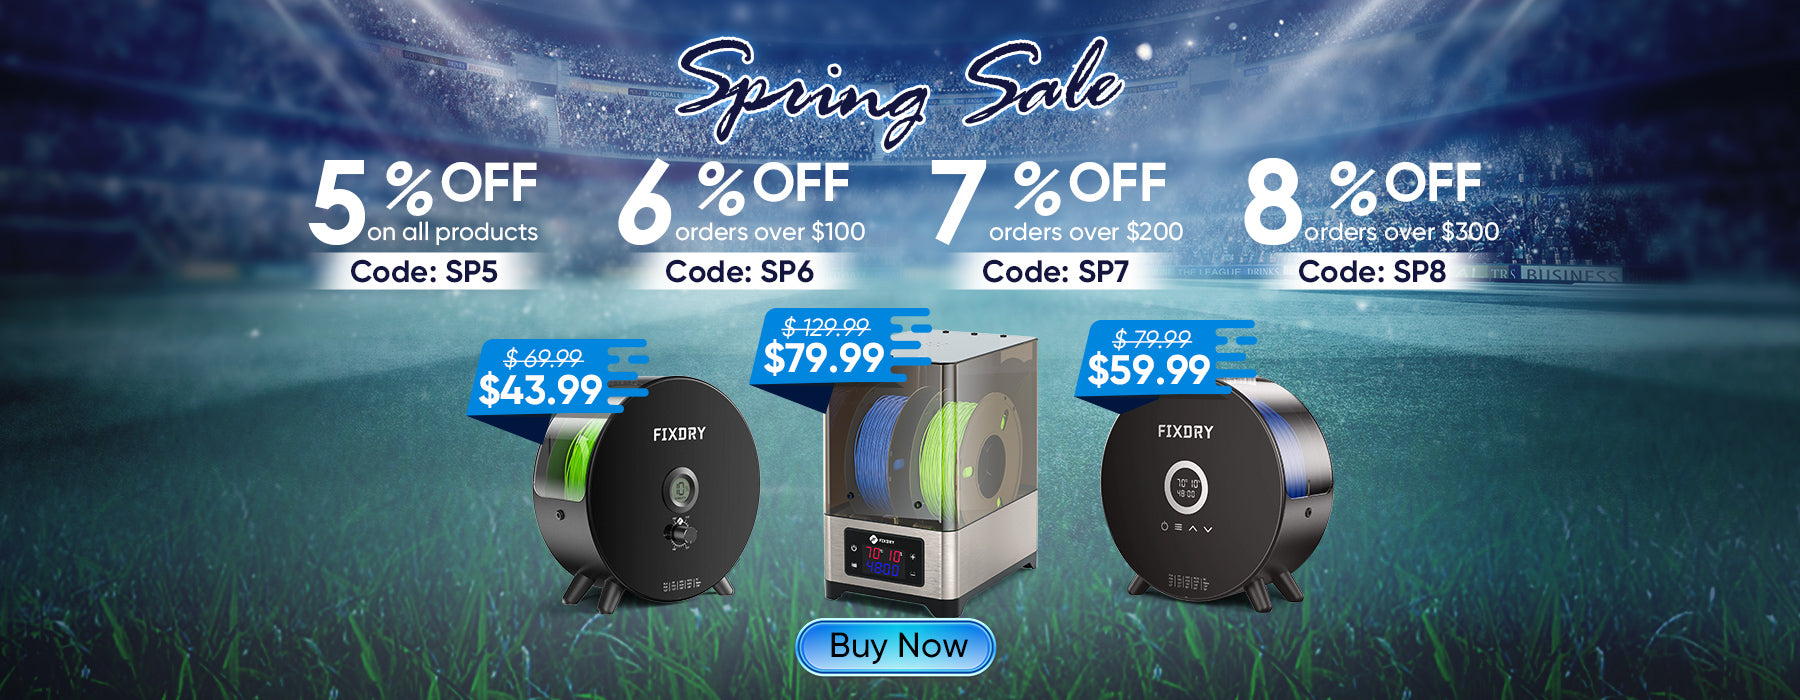 Spring Sale: Get Ready to Refresh Your Filament with Fixdry Deals!